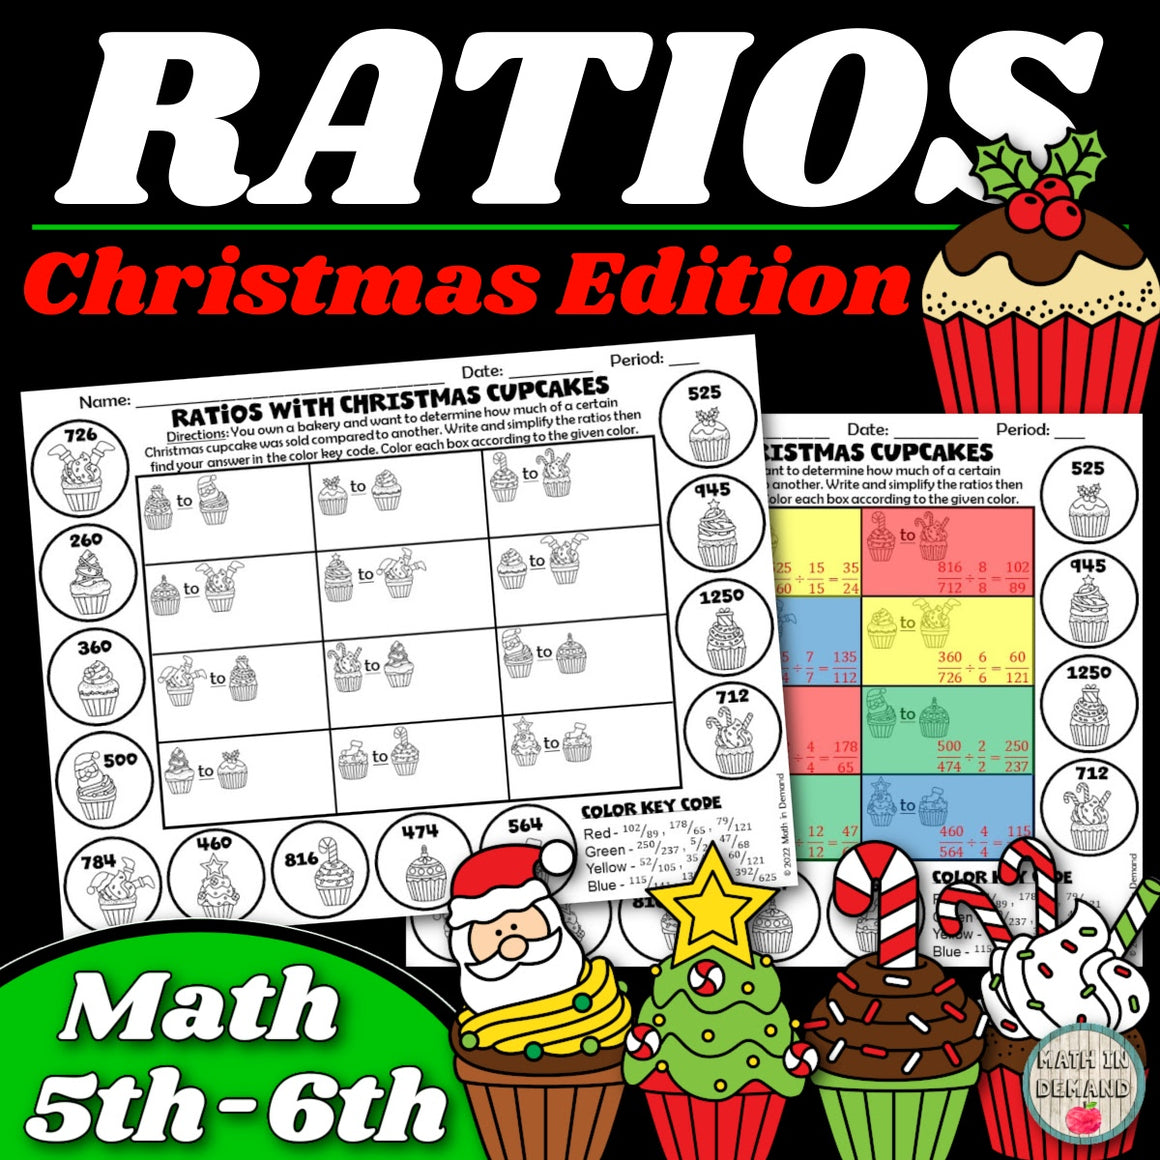 Simplifying Ratios with Christmas Cupcakes Activity 5th and 6th Grade Math